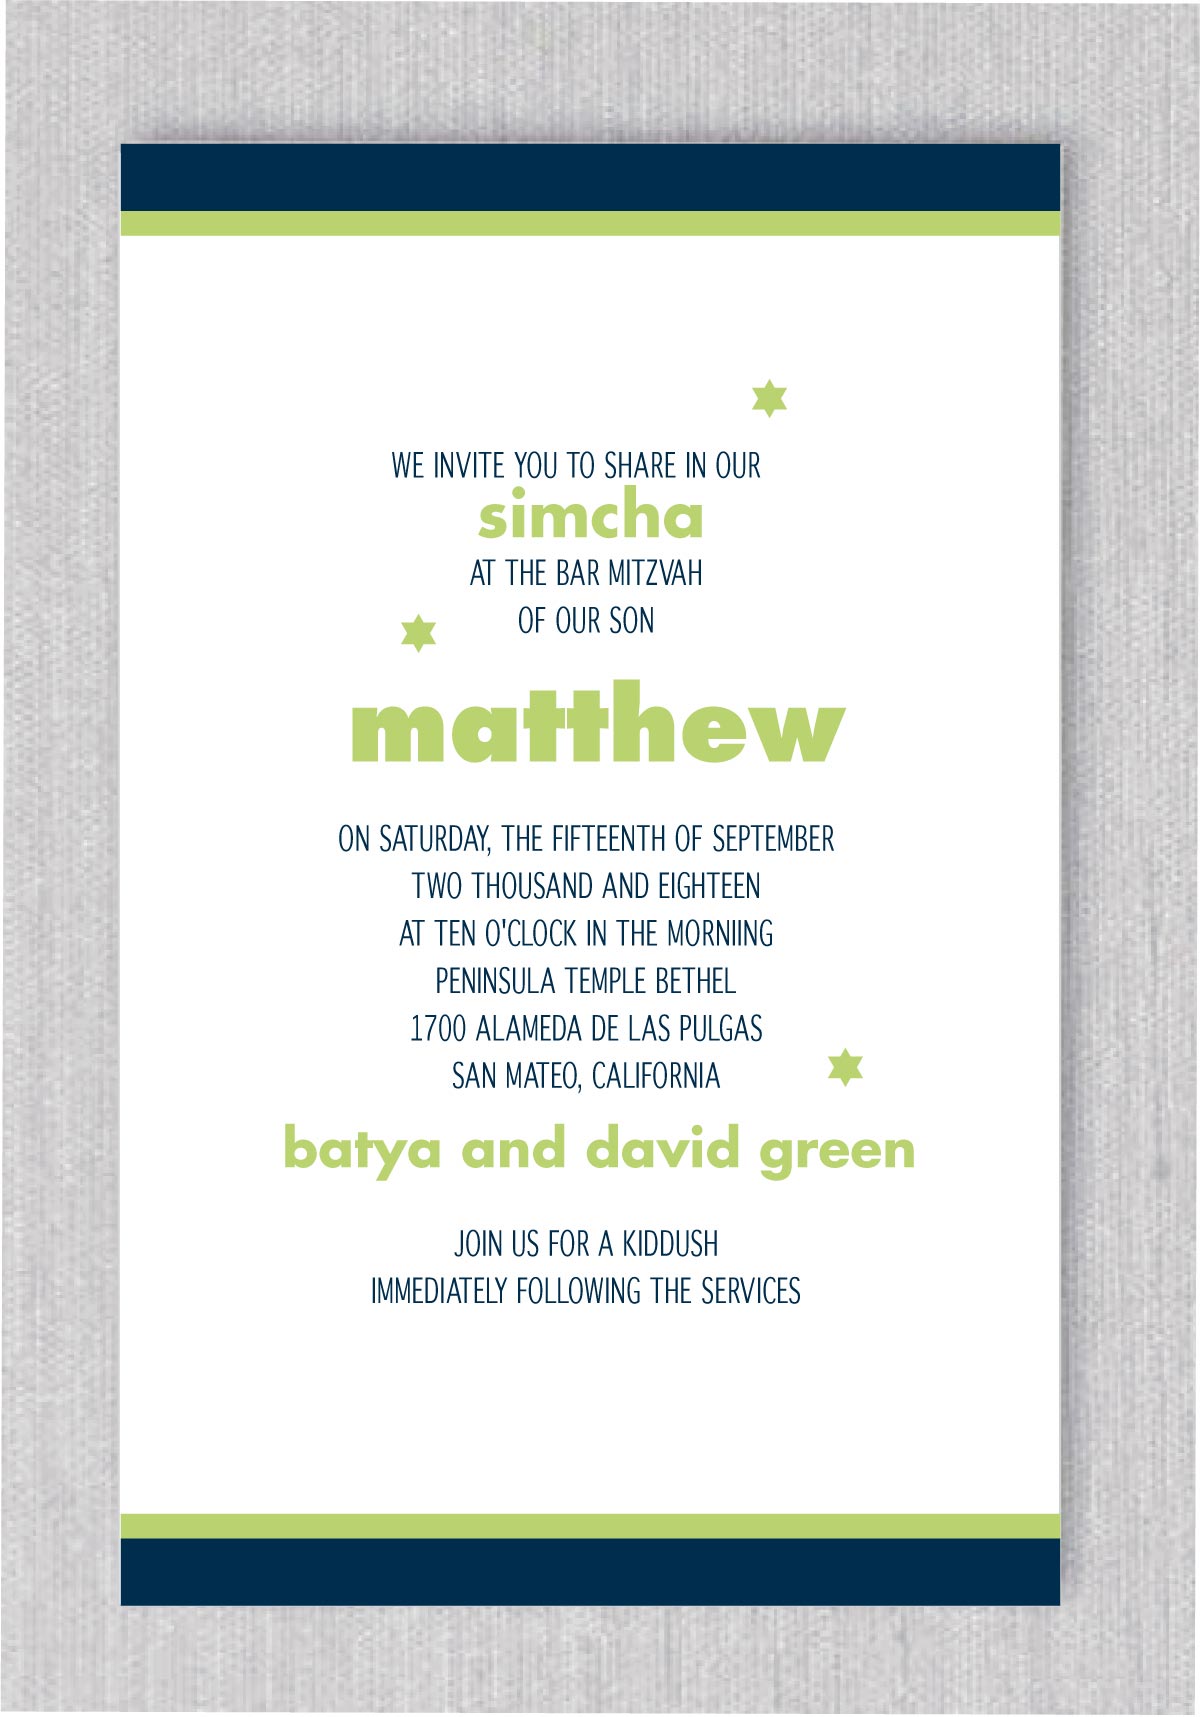 Our Embark Bar Mitzvah Invitation features a bright color scheme and unique construction, perfect to announce your upcoming milestone event. Crisp white stock sets off the two ink colors used to display your event details.